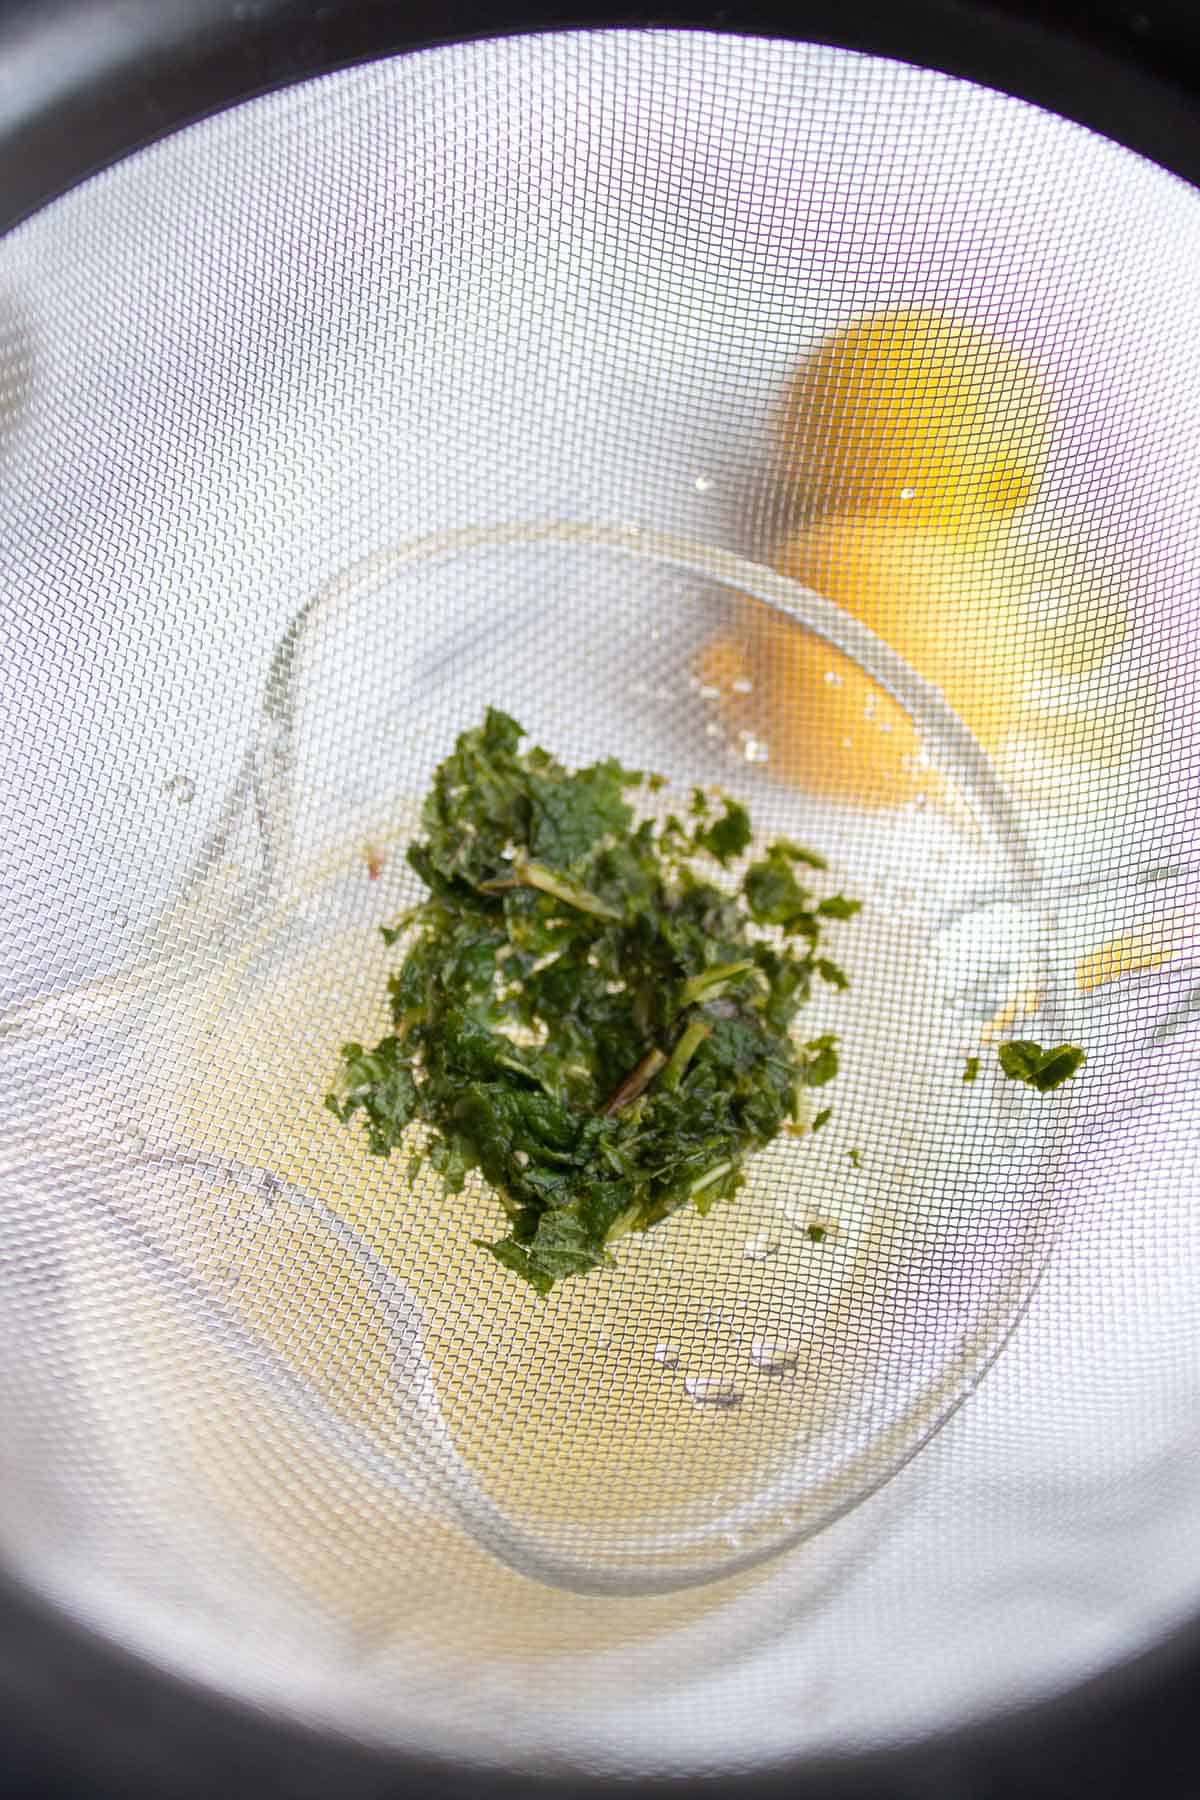 Mint being strained out through a fine mesh strainer.